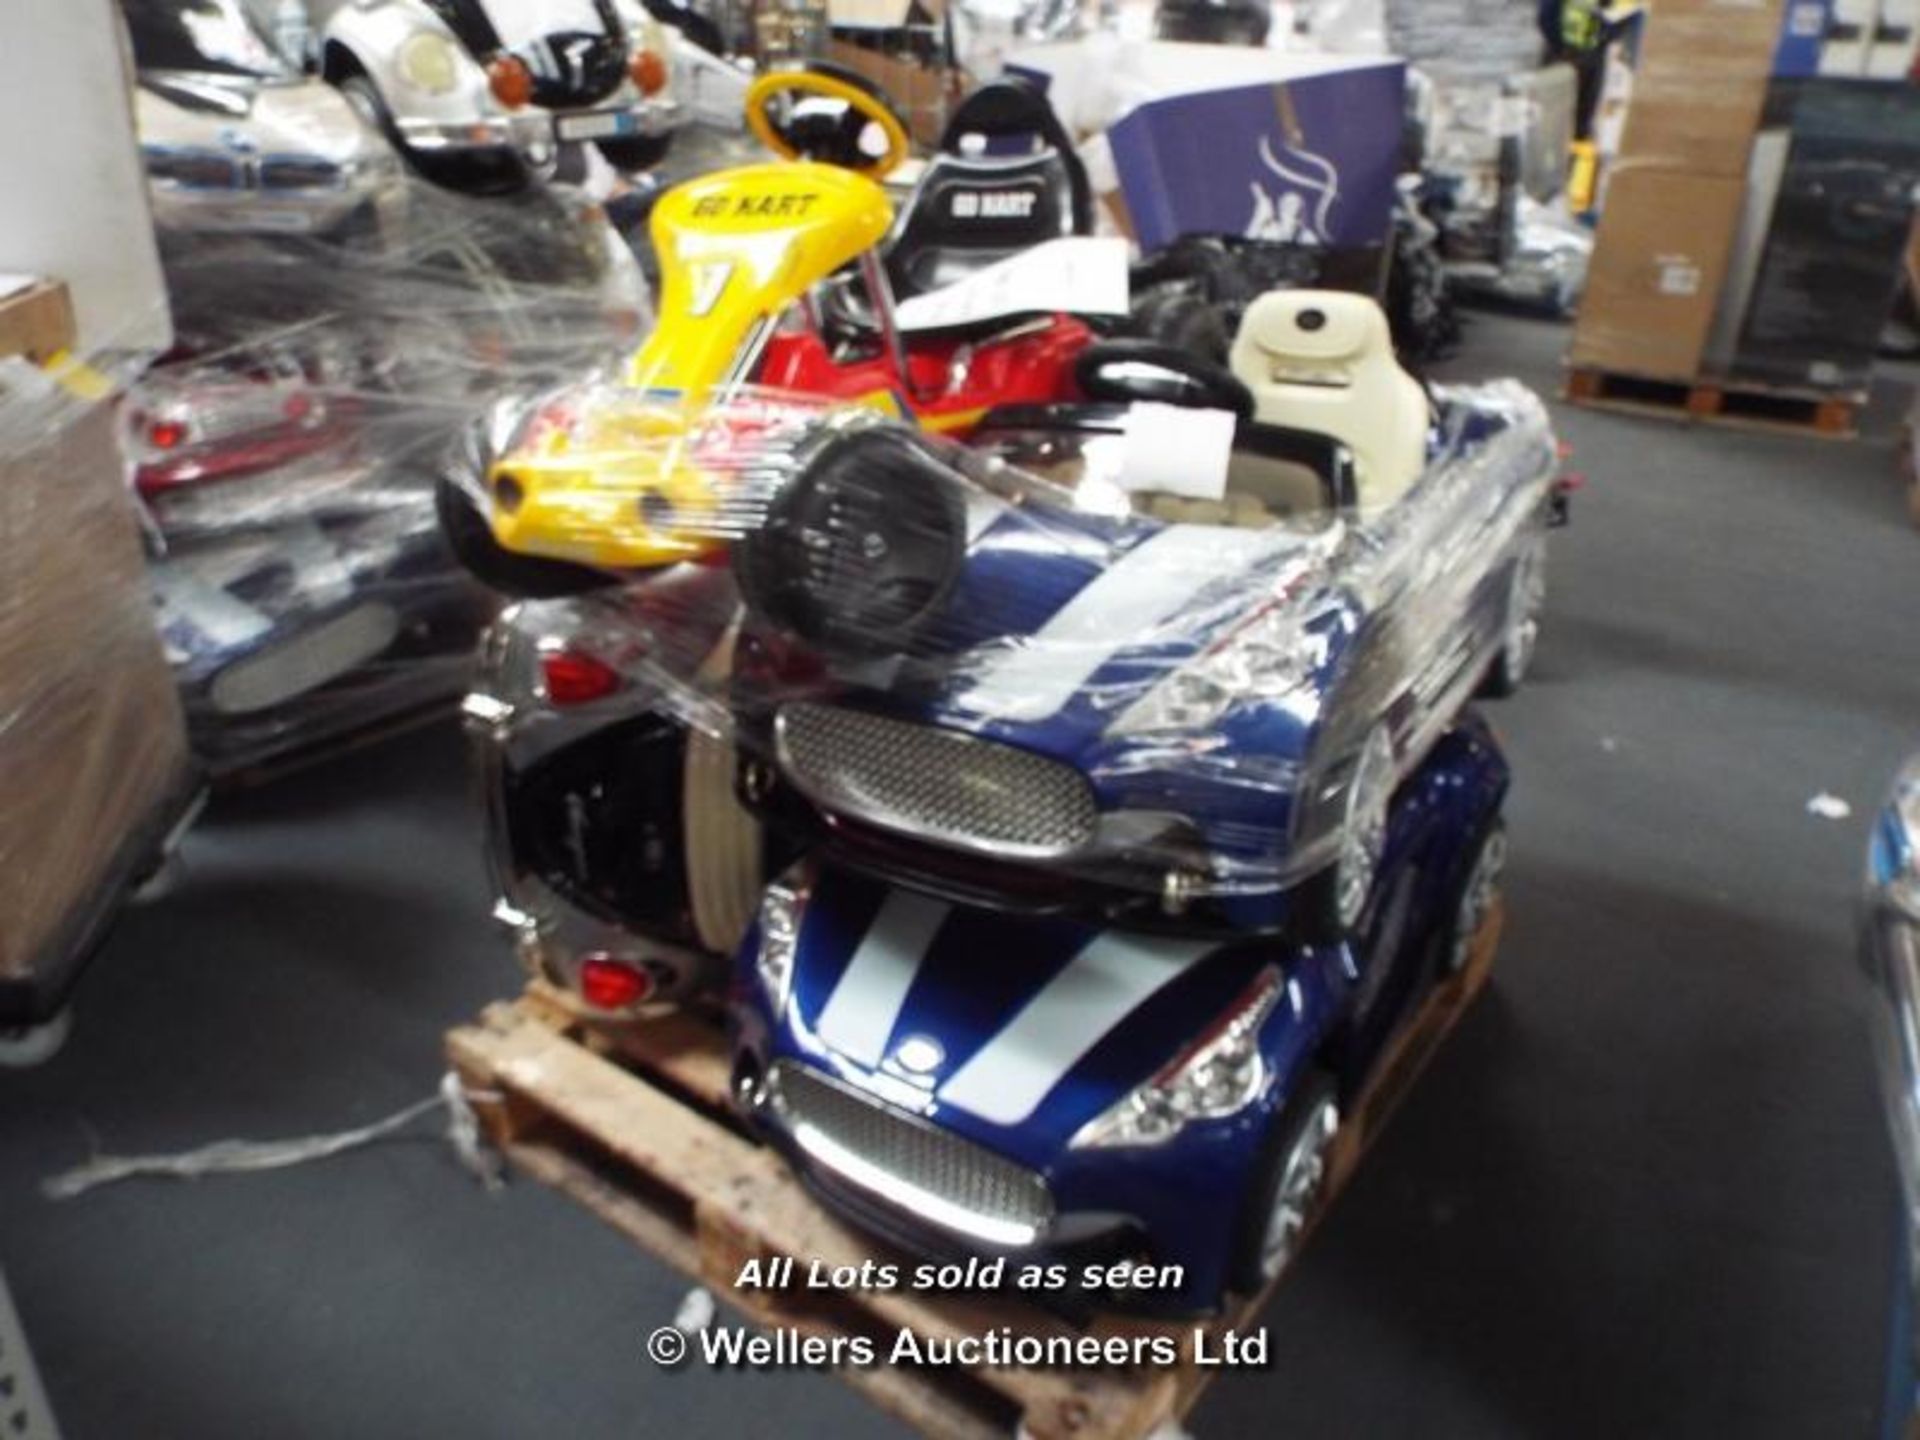 MIXED PALLET OF 5X KIDS RIDE-ON ELECTRONIC TOYS INCLUDING ASTON MARTIN, GO KART, VW BEETLE / - Image 3 of 3